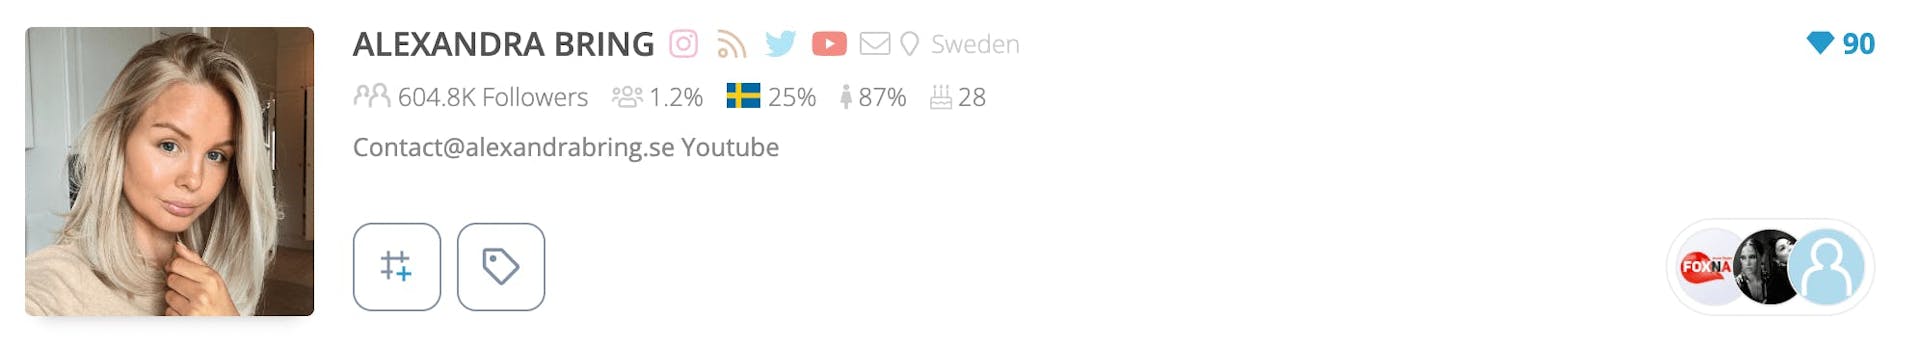 List of the top influencers in Sweden: Alexandra Bring